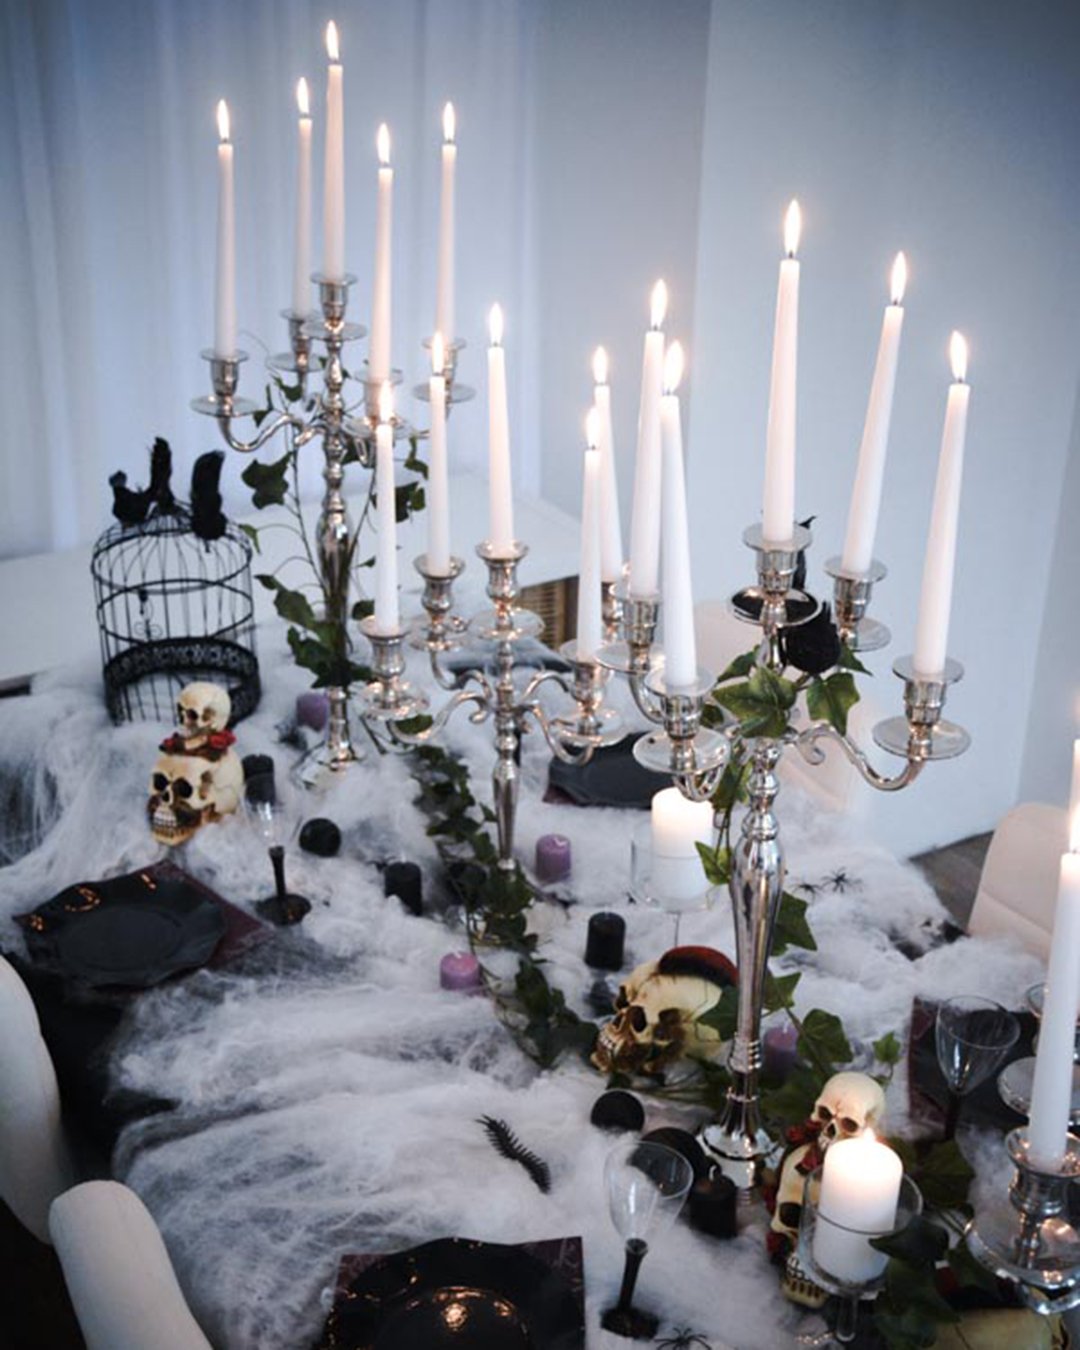 halloween bridal shower ideas amazing dinner table with candles nathye_lamarieeencolere